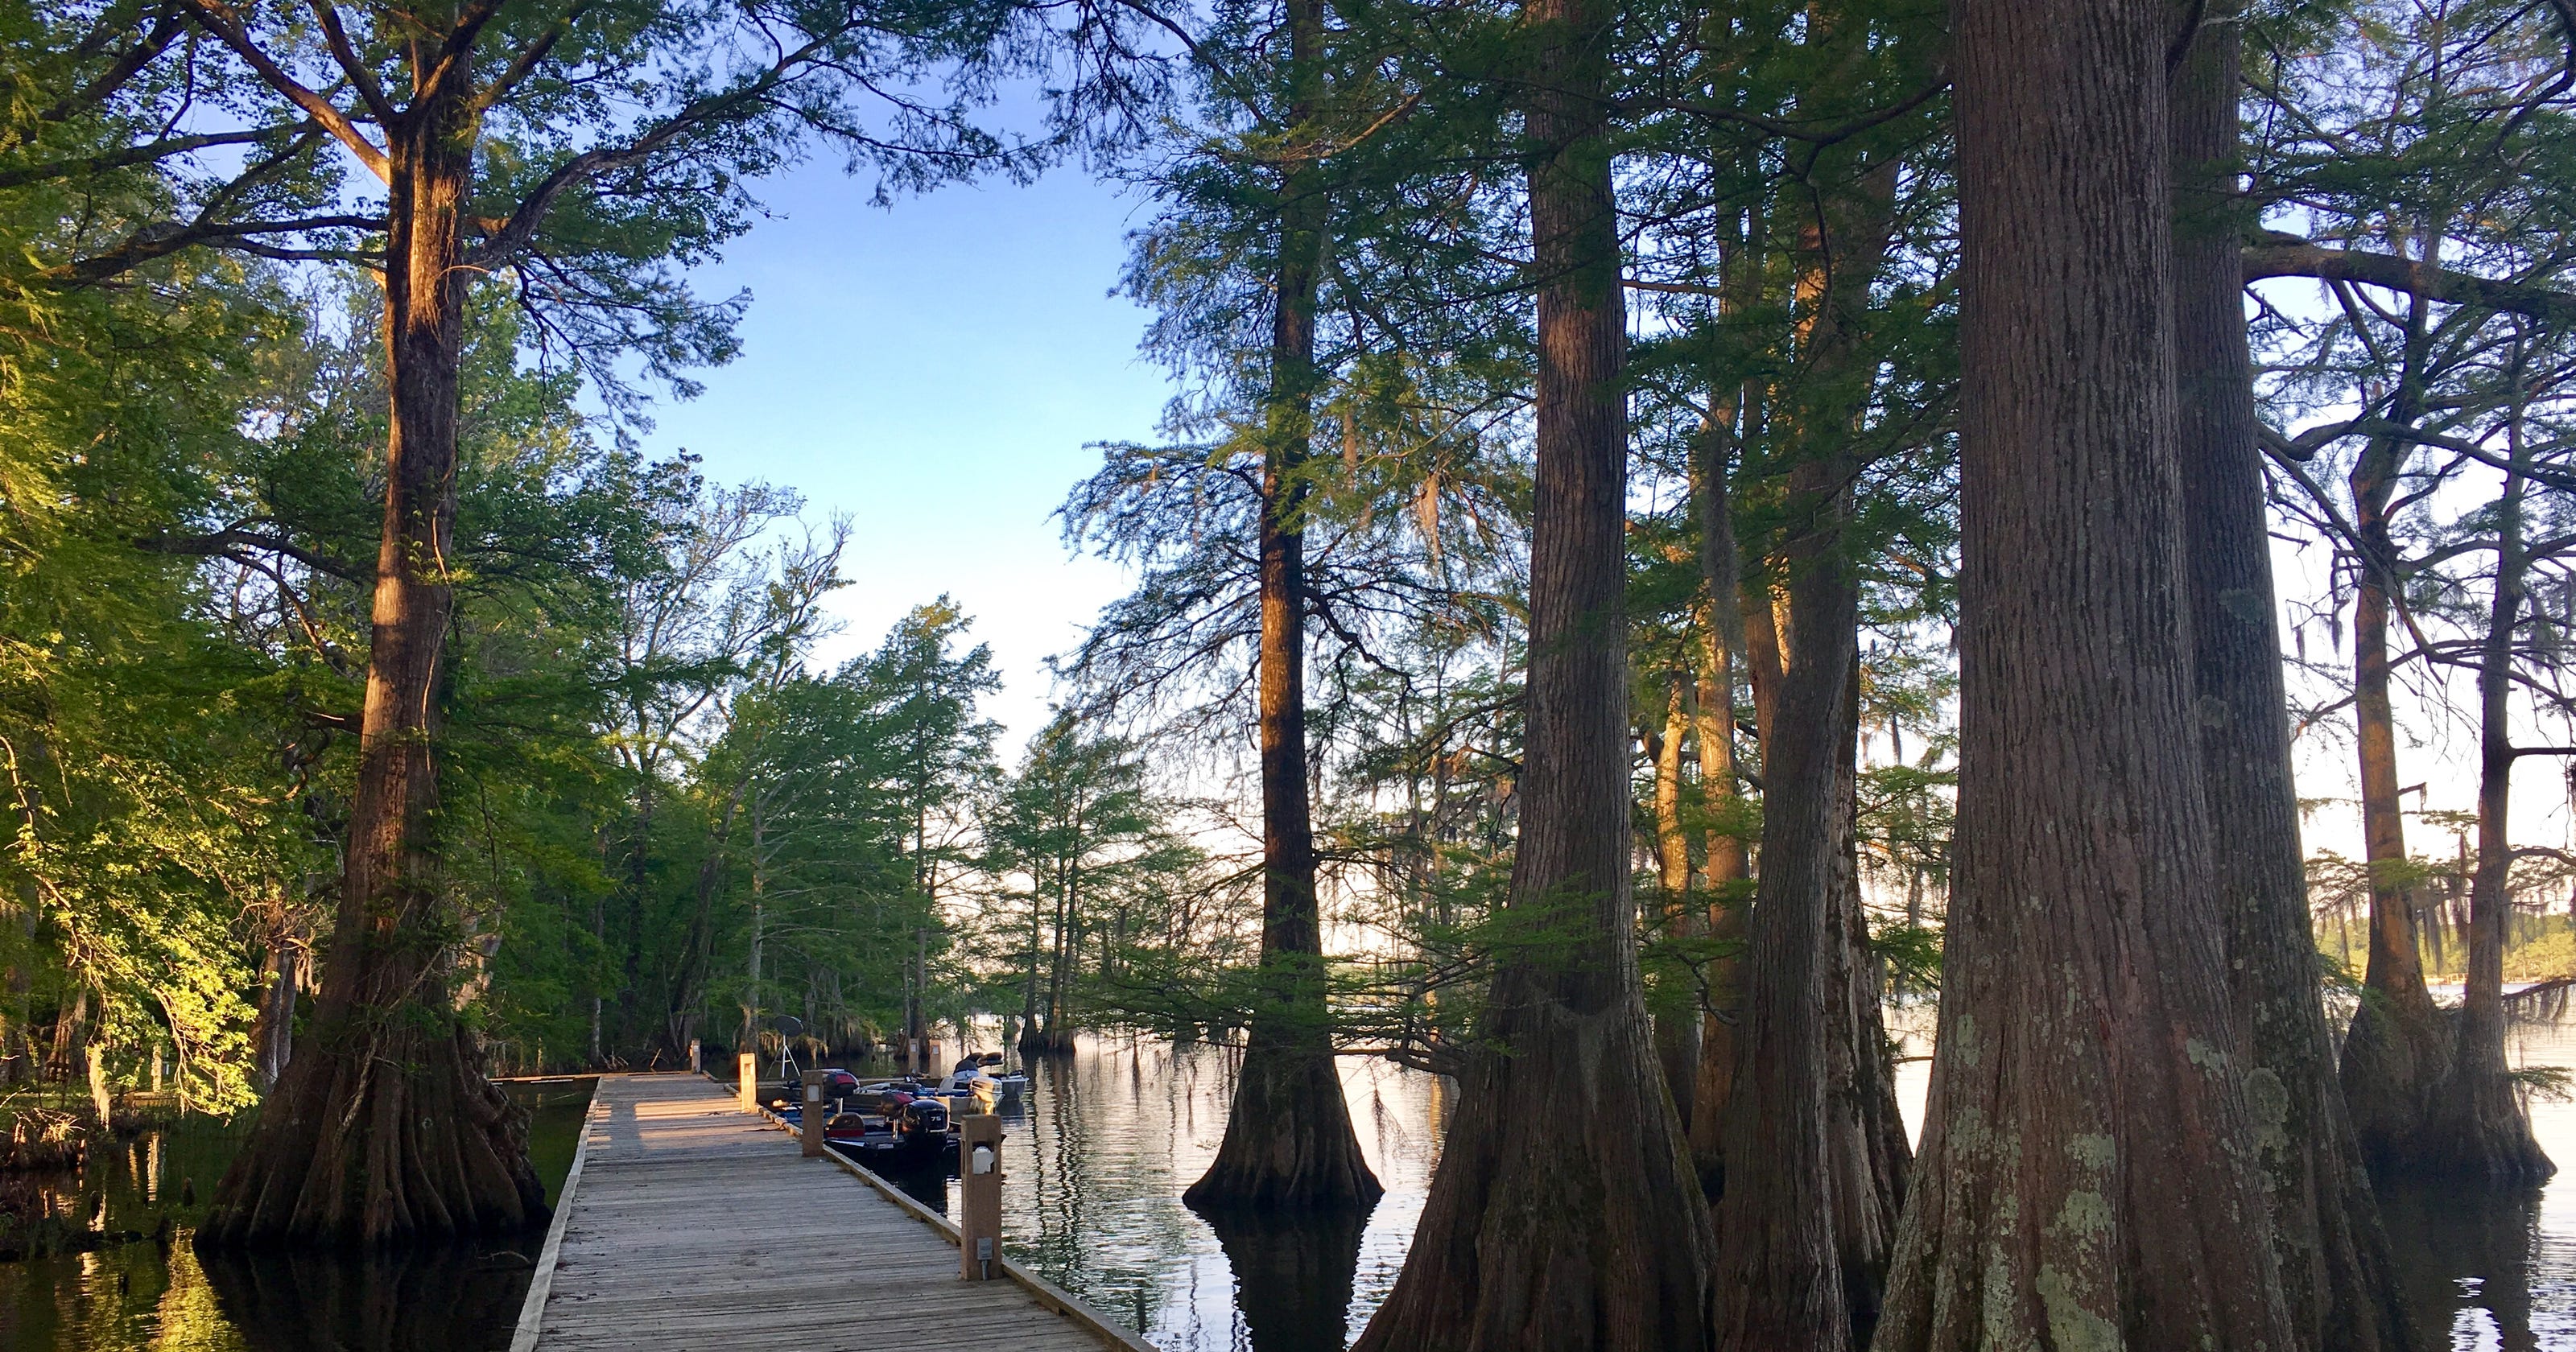 Louisiana state parks reopen campsites with promo code for discounts